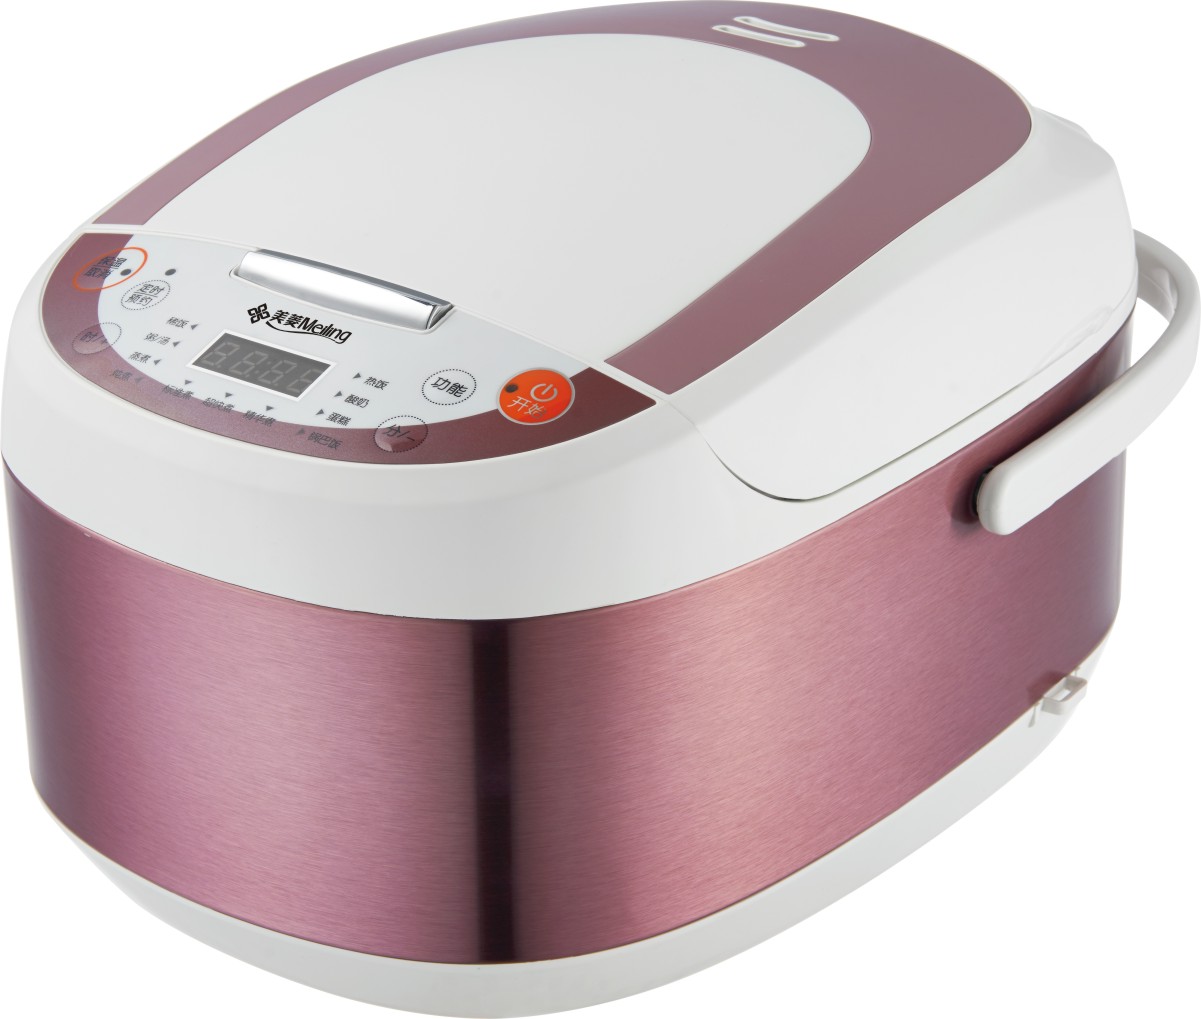 Guangdong manufacture kitchen appliance Electric rice cooker with non-stick coating inner pot